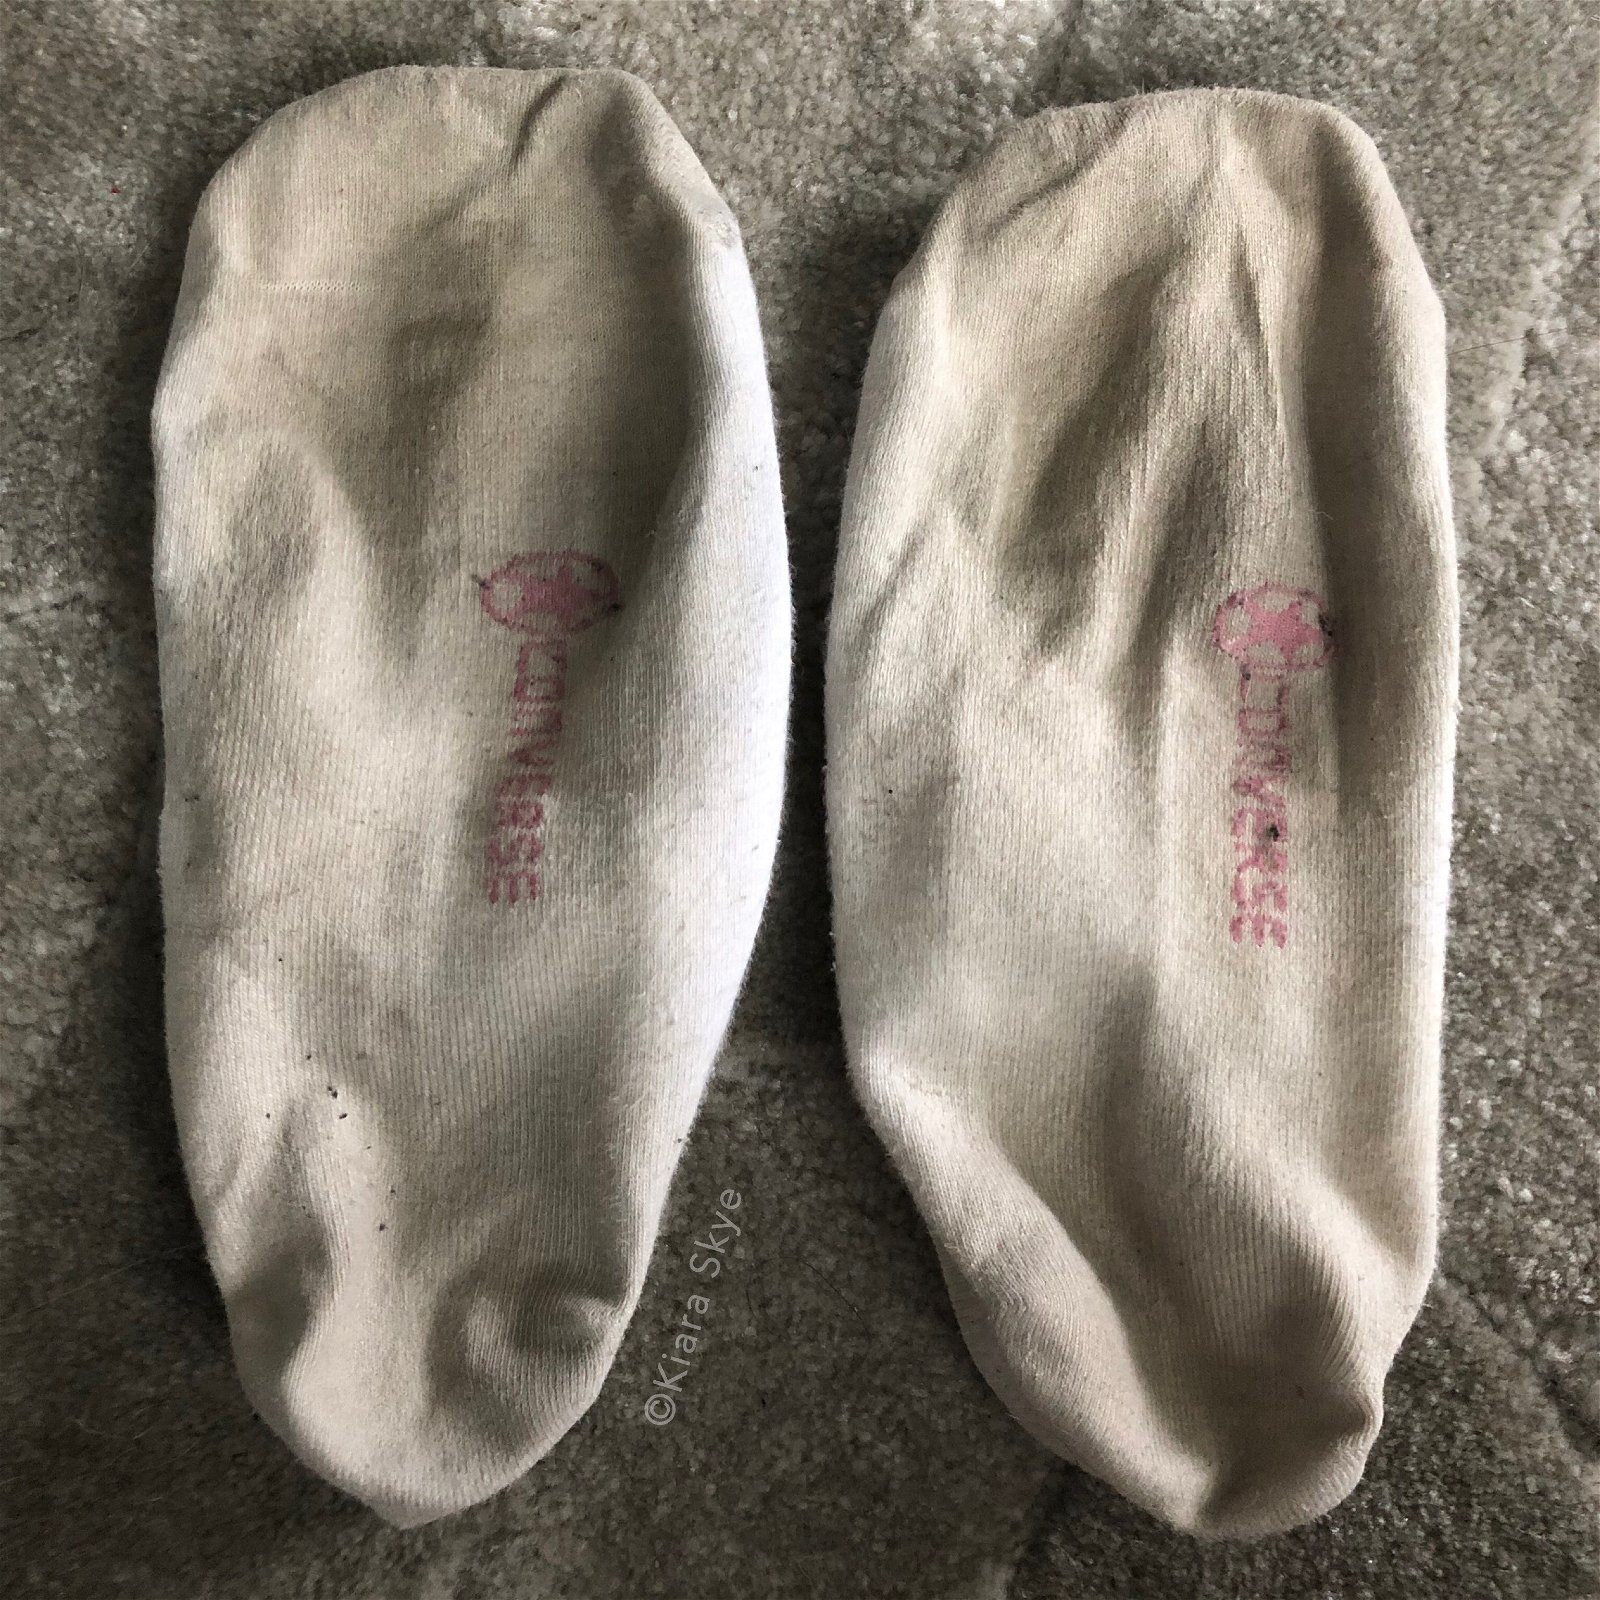 Watch the Photo by Kiara Skye with the username @KiaraSkye, who is a star user, posted on April 20, 2019. The post is about the topic Foot Fetish. and the text says '🧦 Worn Socks Auction! 💵

#bid here- 🧦 Worn Socks Auction! 💵

#bid here- http://www.ebanned.net/cgi-bin/auction/auction.cgi?category=wclothing23&item=1556322744

#footfetish #smellyfeet #stinkyfeet #wornsocks #whitesocka #dirtysocks #feet #smallfeet'